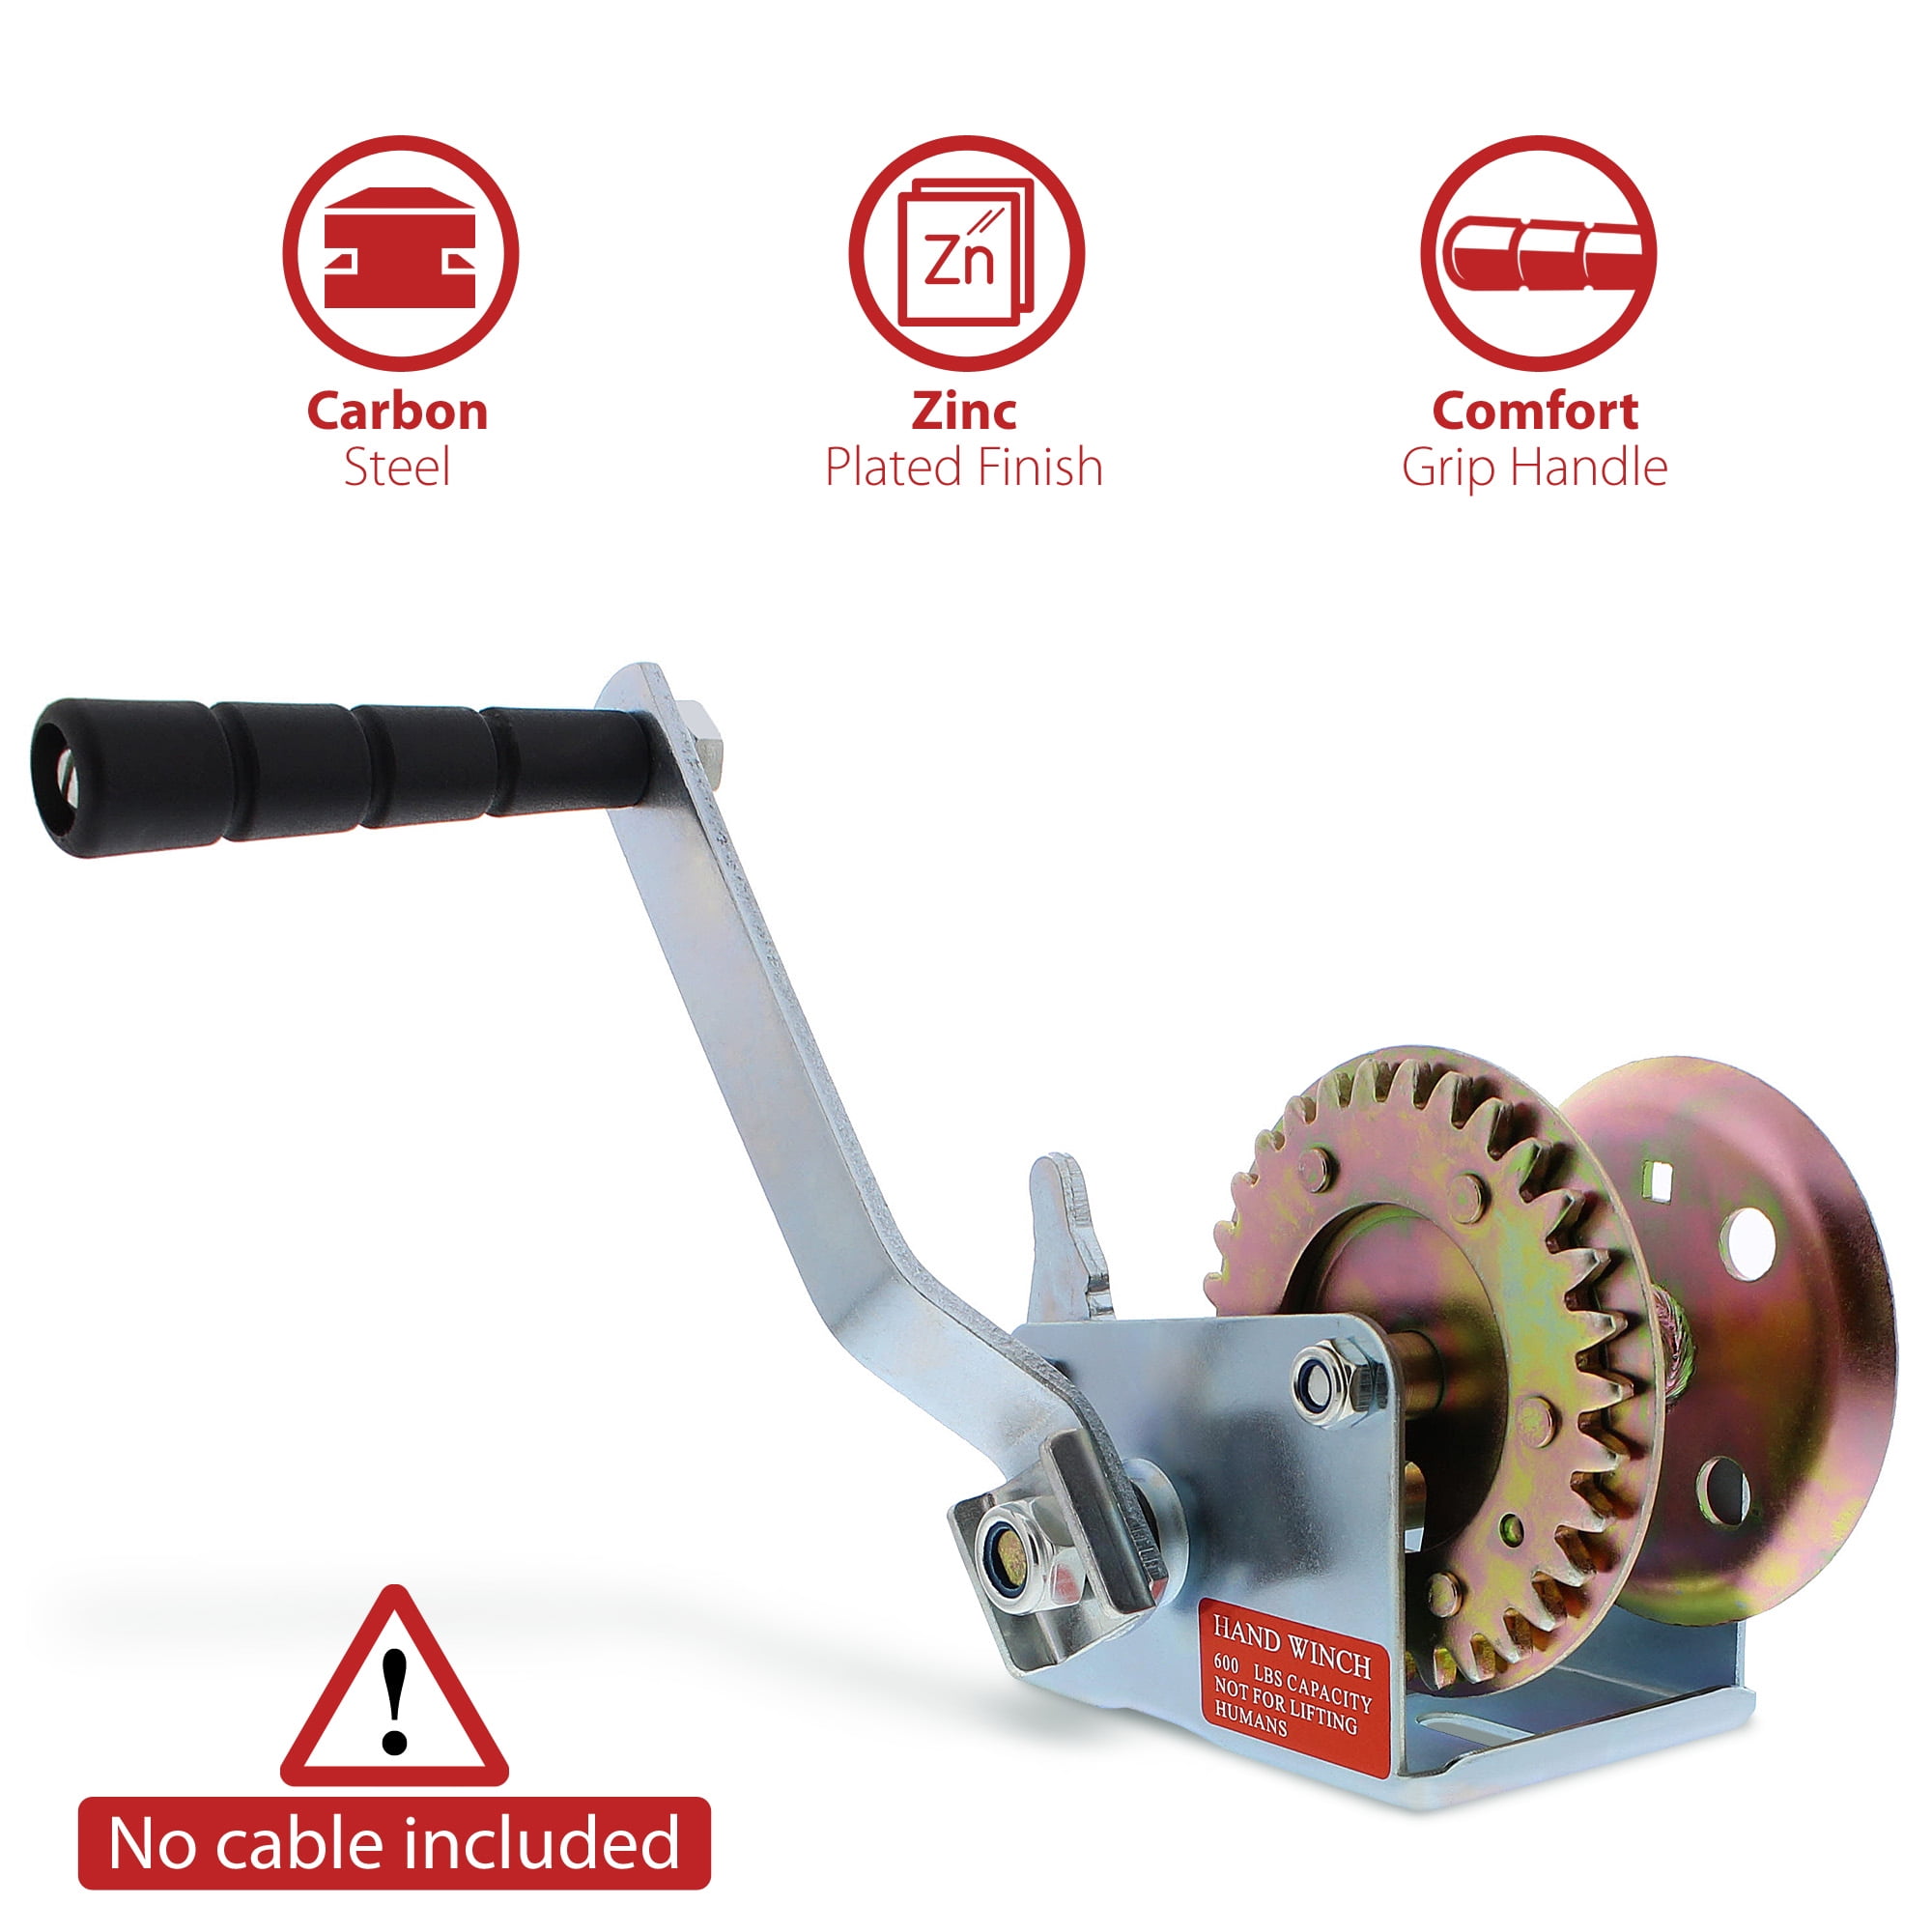 Boat or ATV ABN Hand Crank Gear Winch up to 600 lb for Trailer Single-Speed 